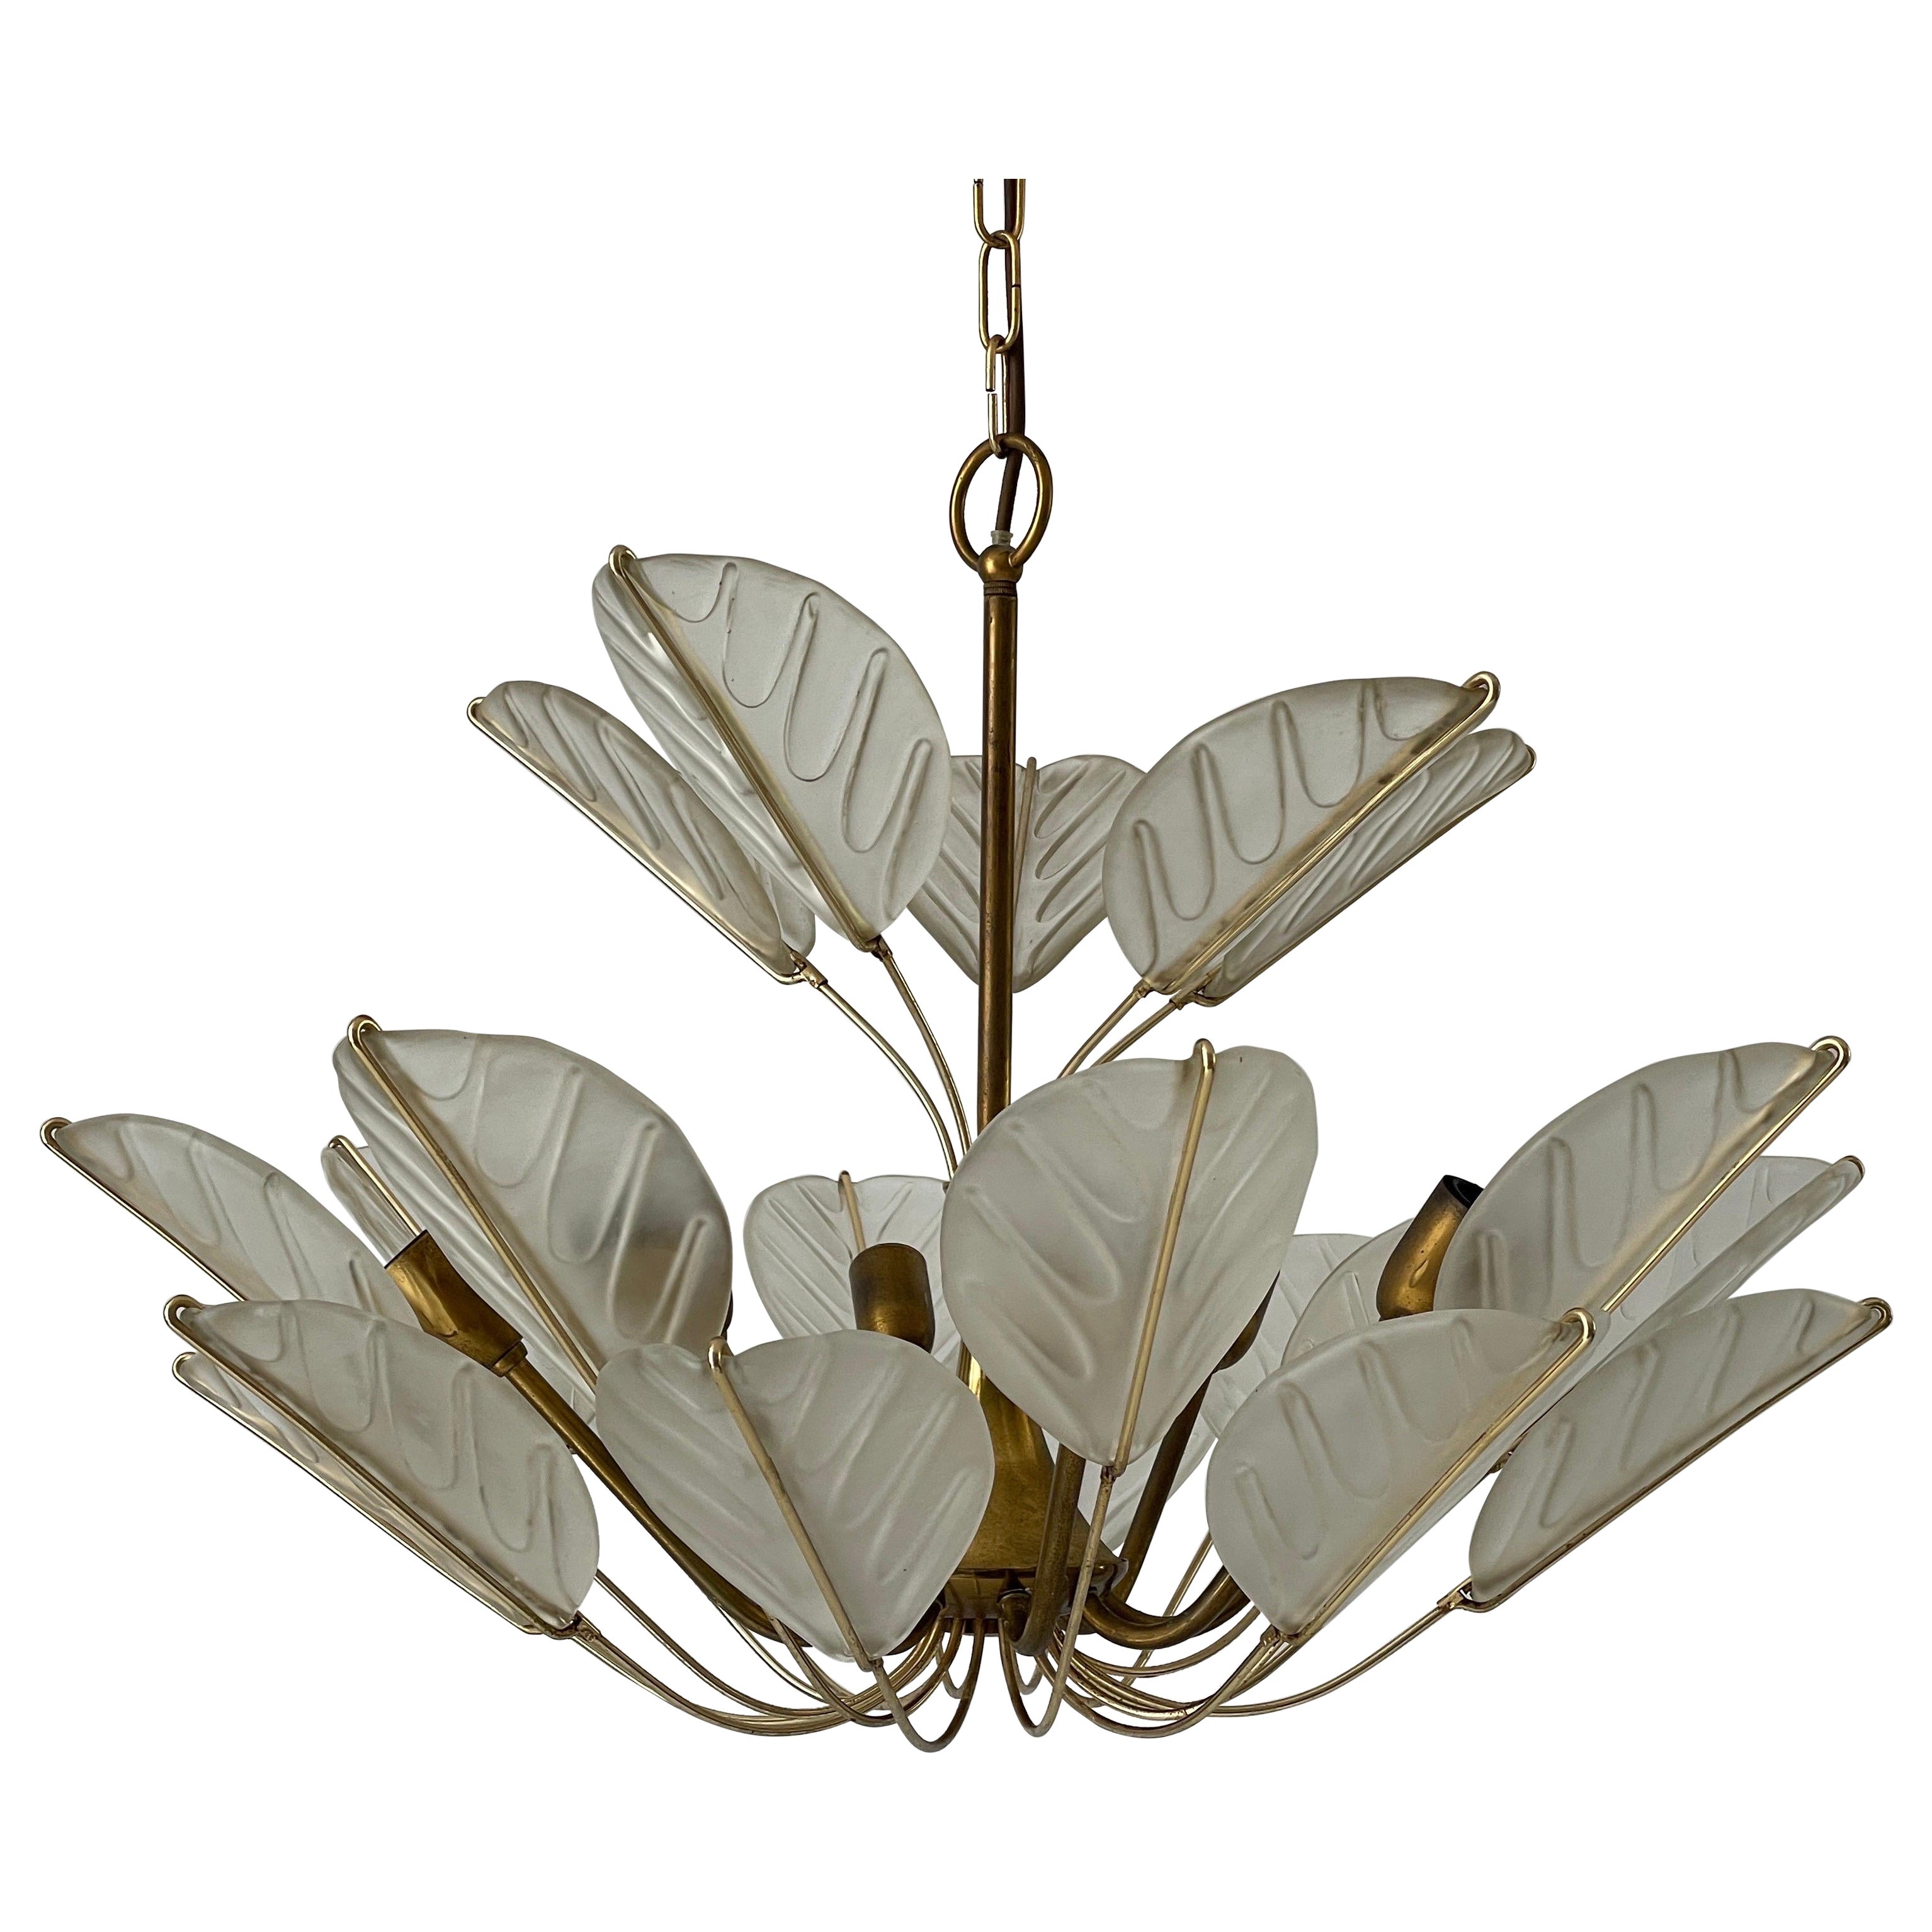 Luxurious 8-armed Brass Chandelier with Crystal Glass Leaves, 1960s, Germany For Sale